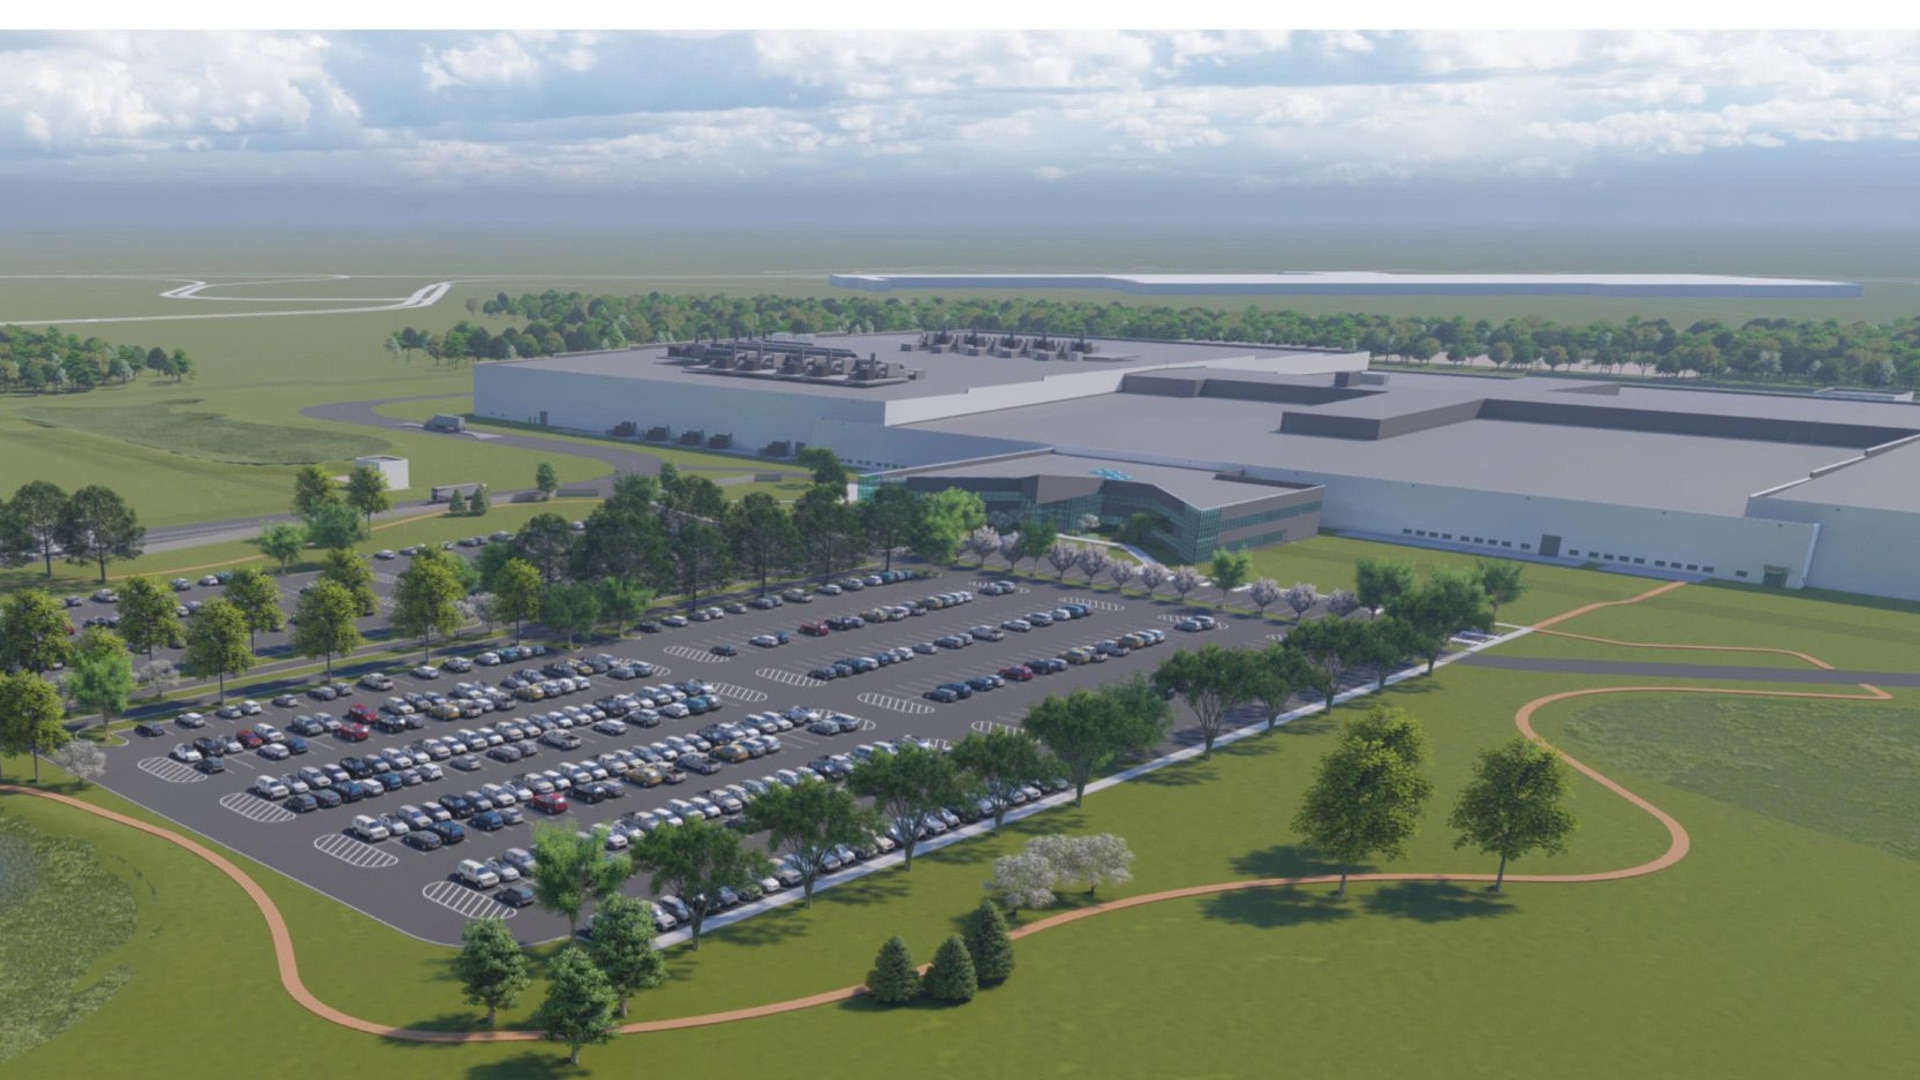 Artist's impression of Ultium Cells' battery plant in Lordstown, Ohio